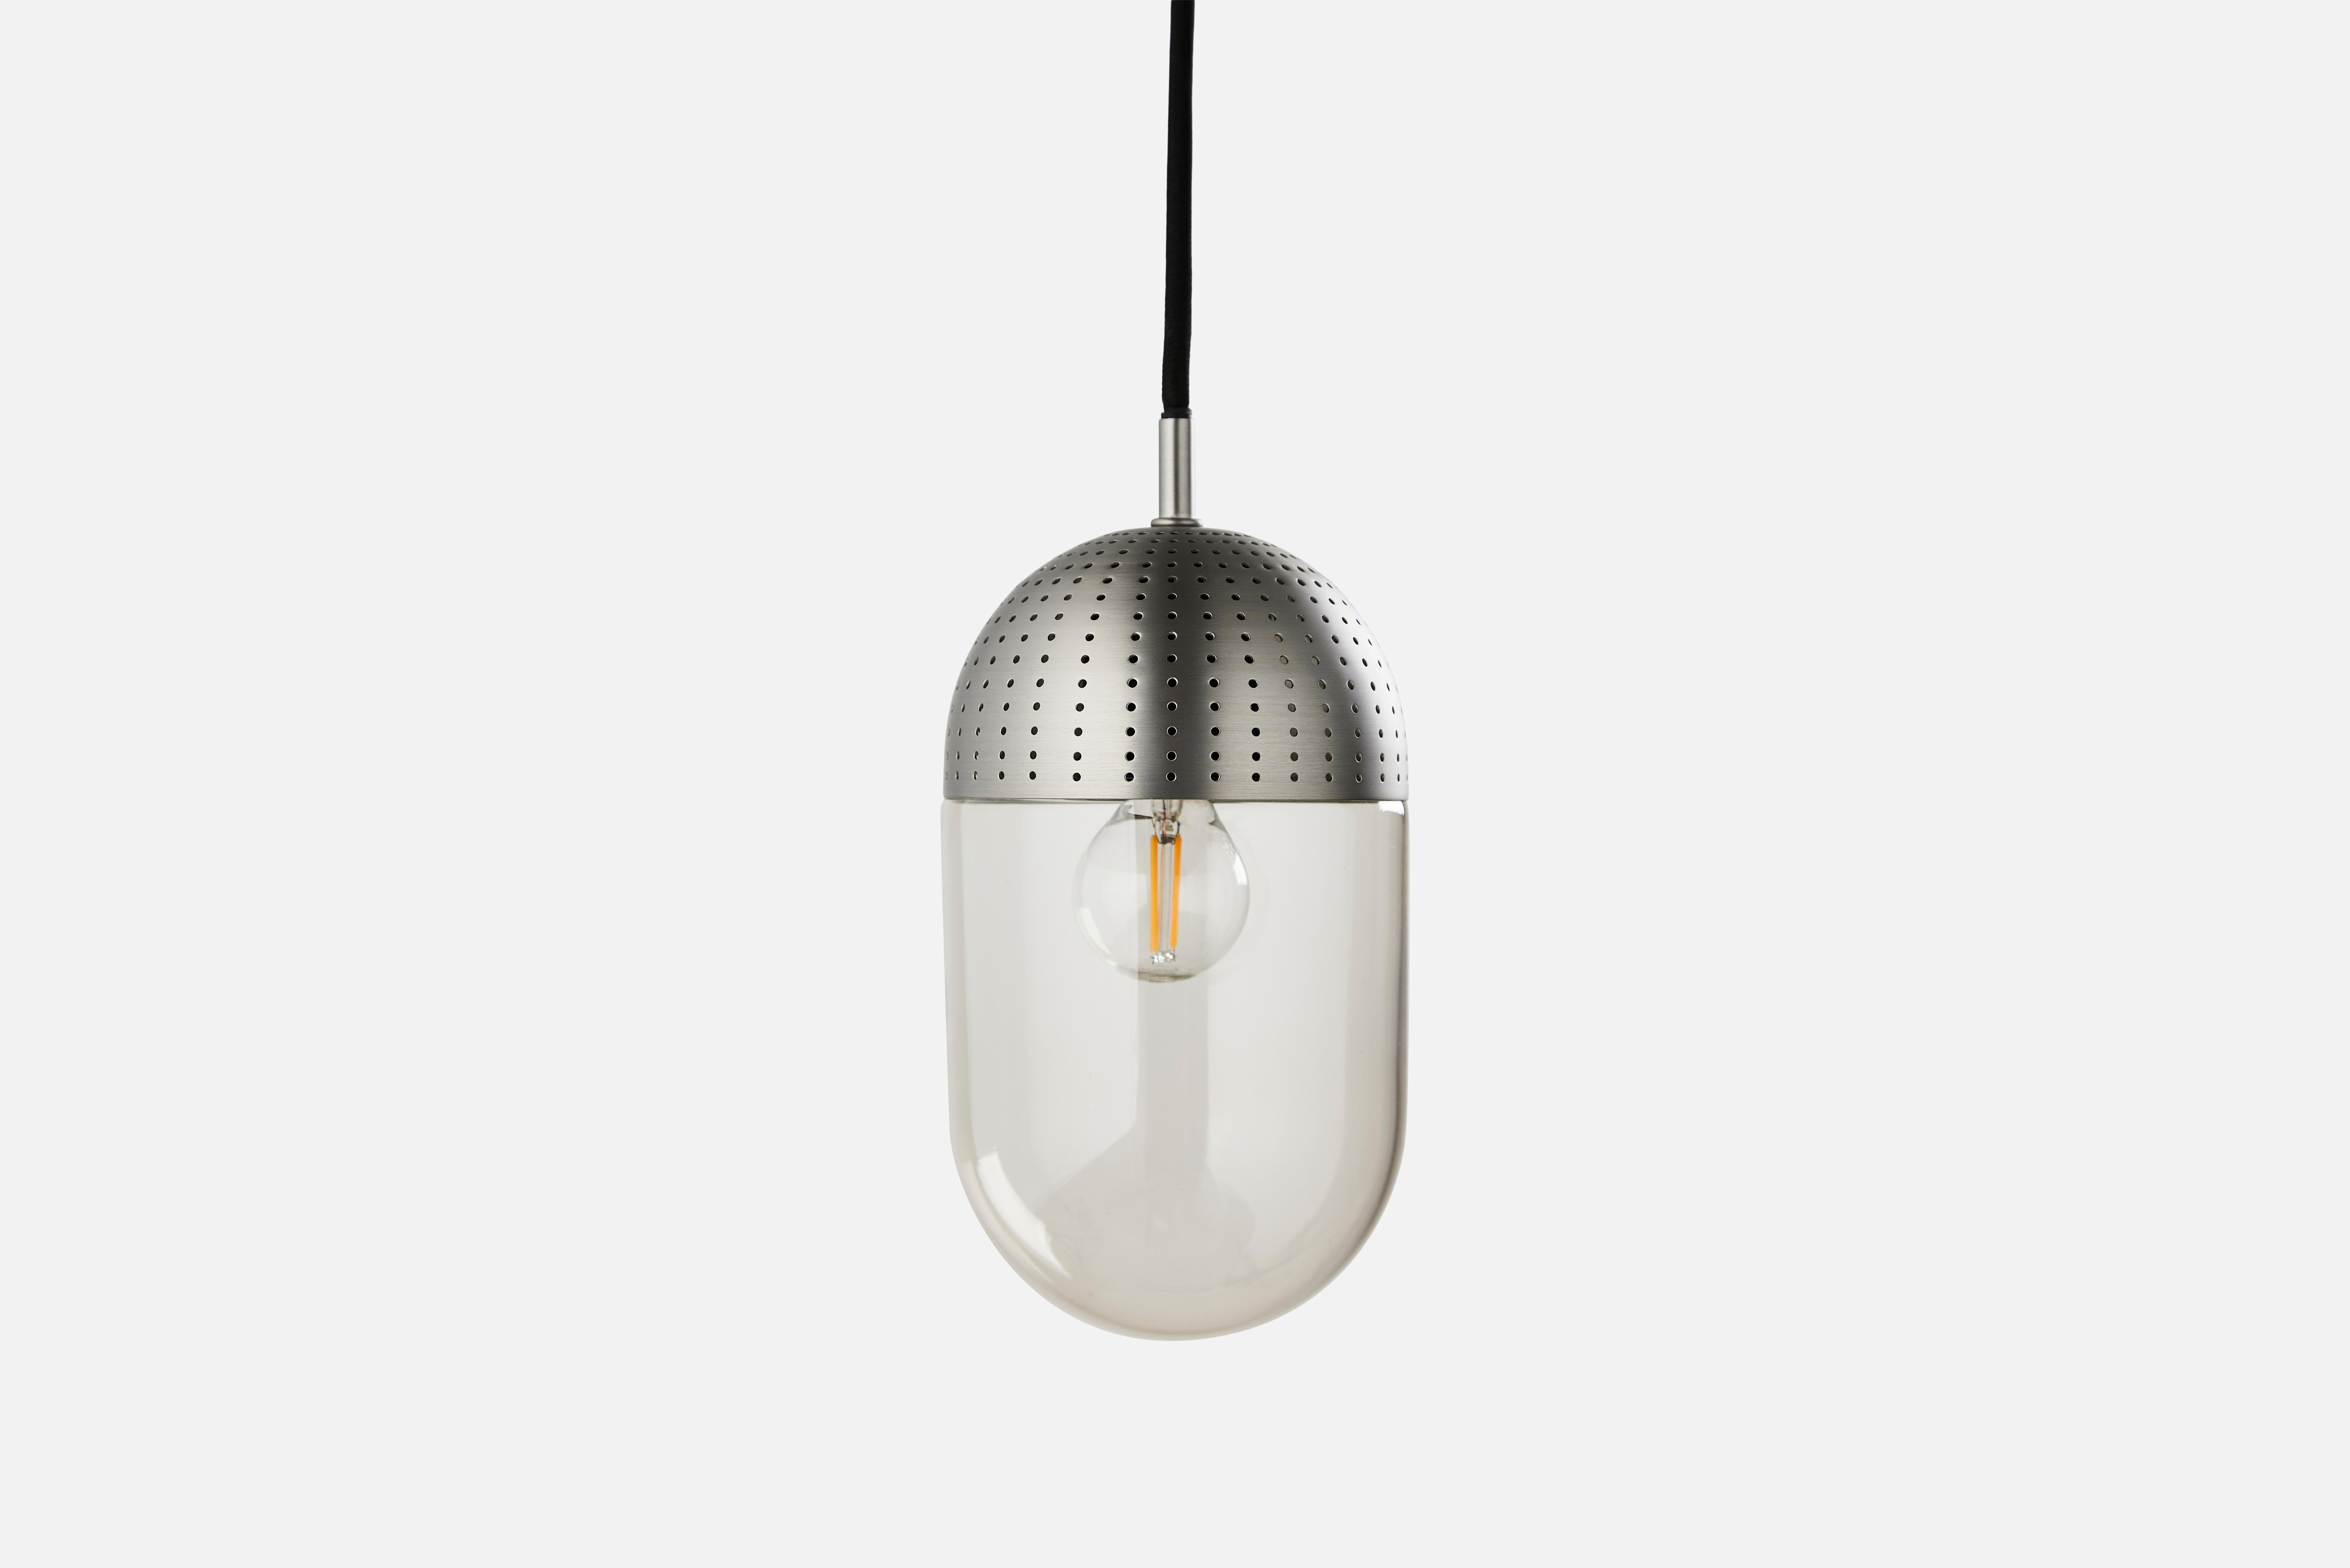 Large satin dot pendant lamp by Rikke Frost
Materials: Metal, glass.
Dimensions: D 14 x H 21 cm
Available in black or satin and in 3 sizes: H13, H16.6, H21 cm.

Rikke Frost is a Danish graduate from the School of Architecture Aarhus. Since